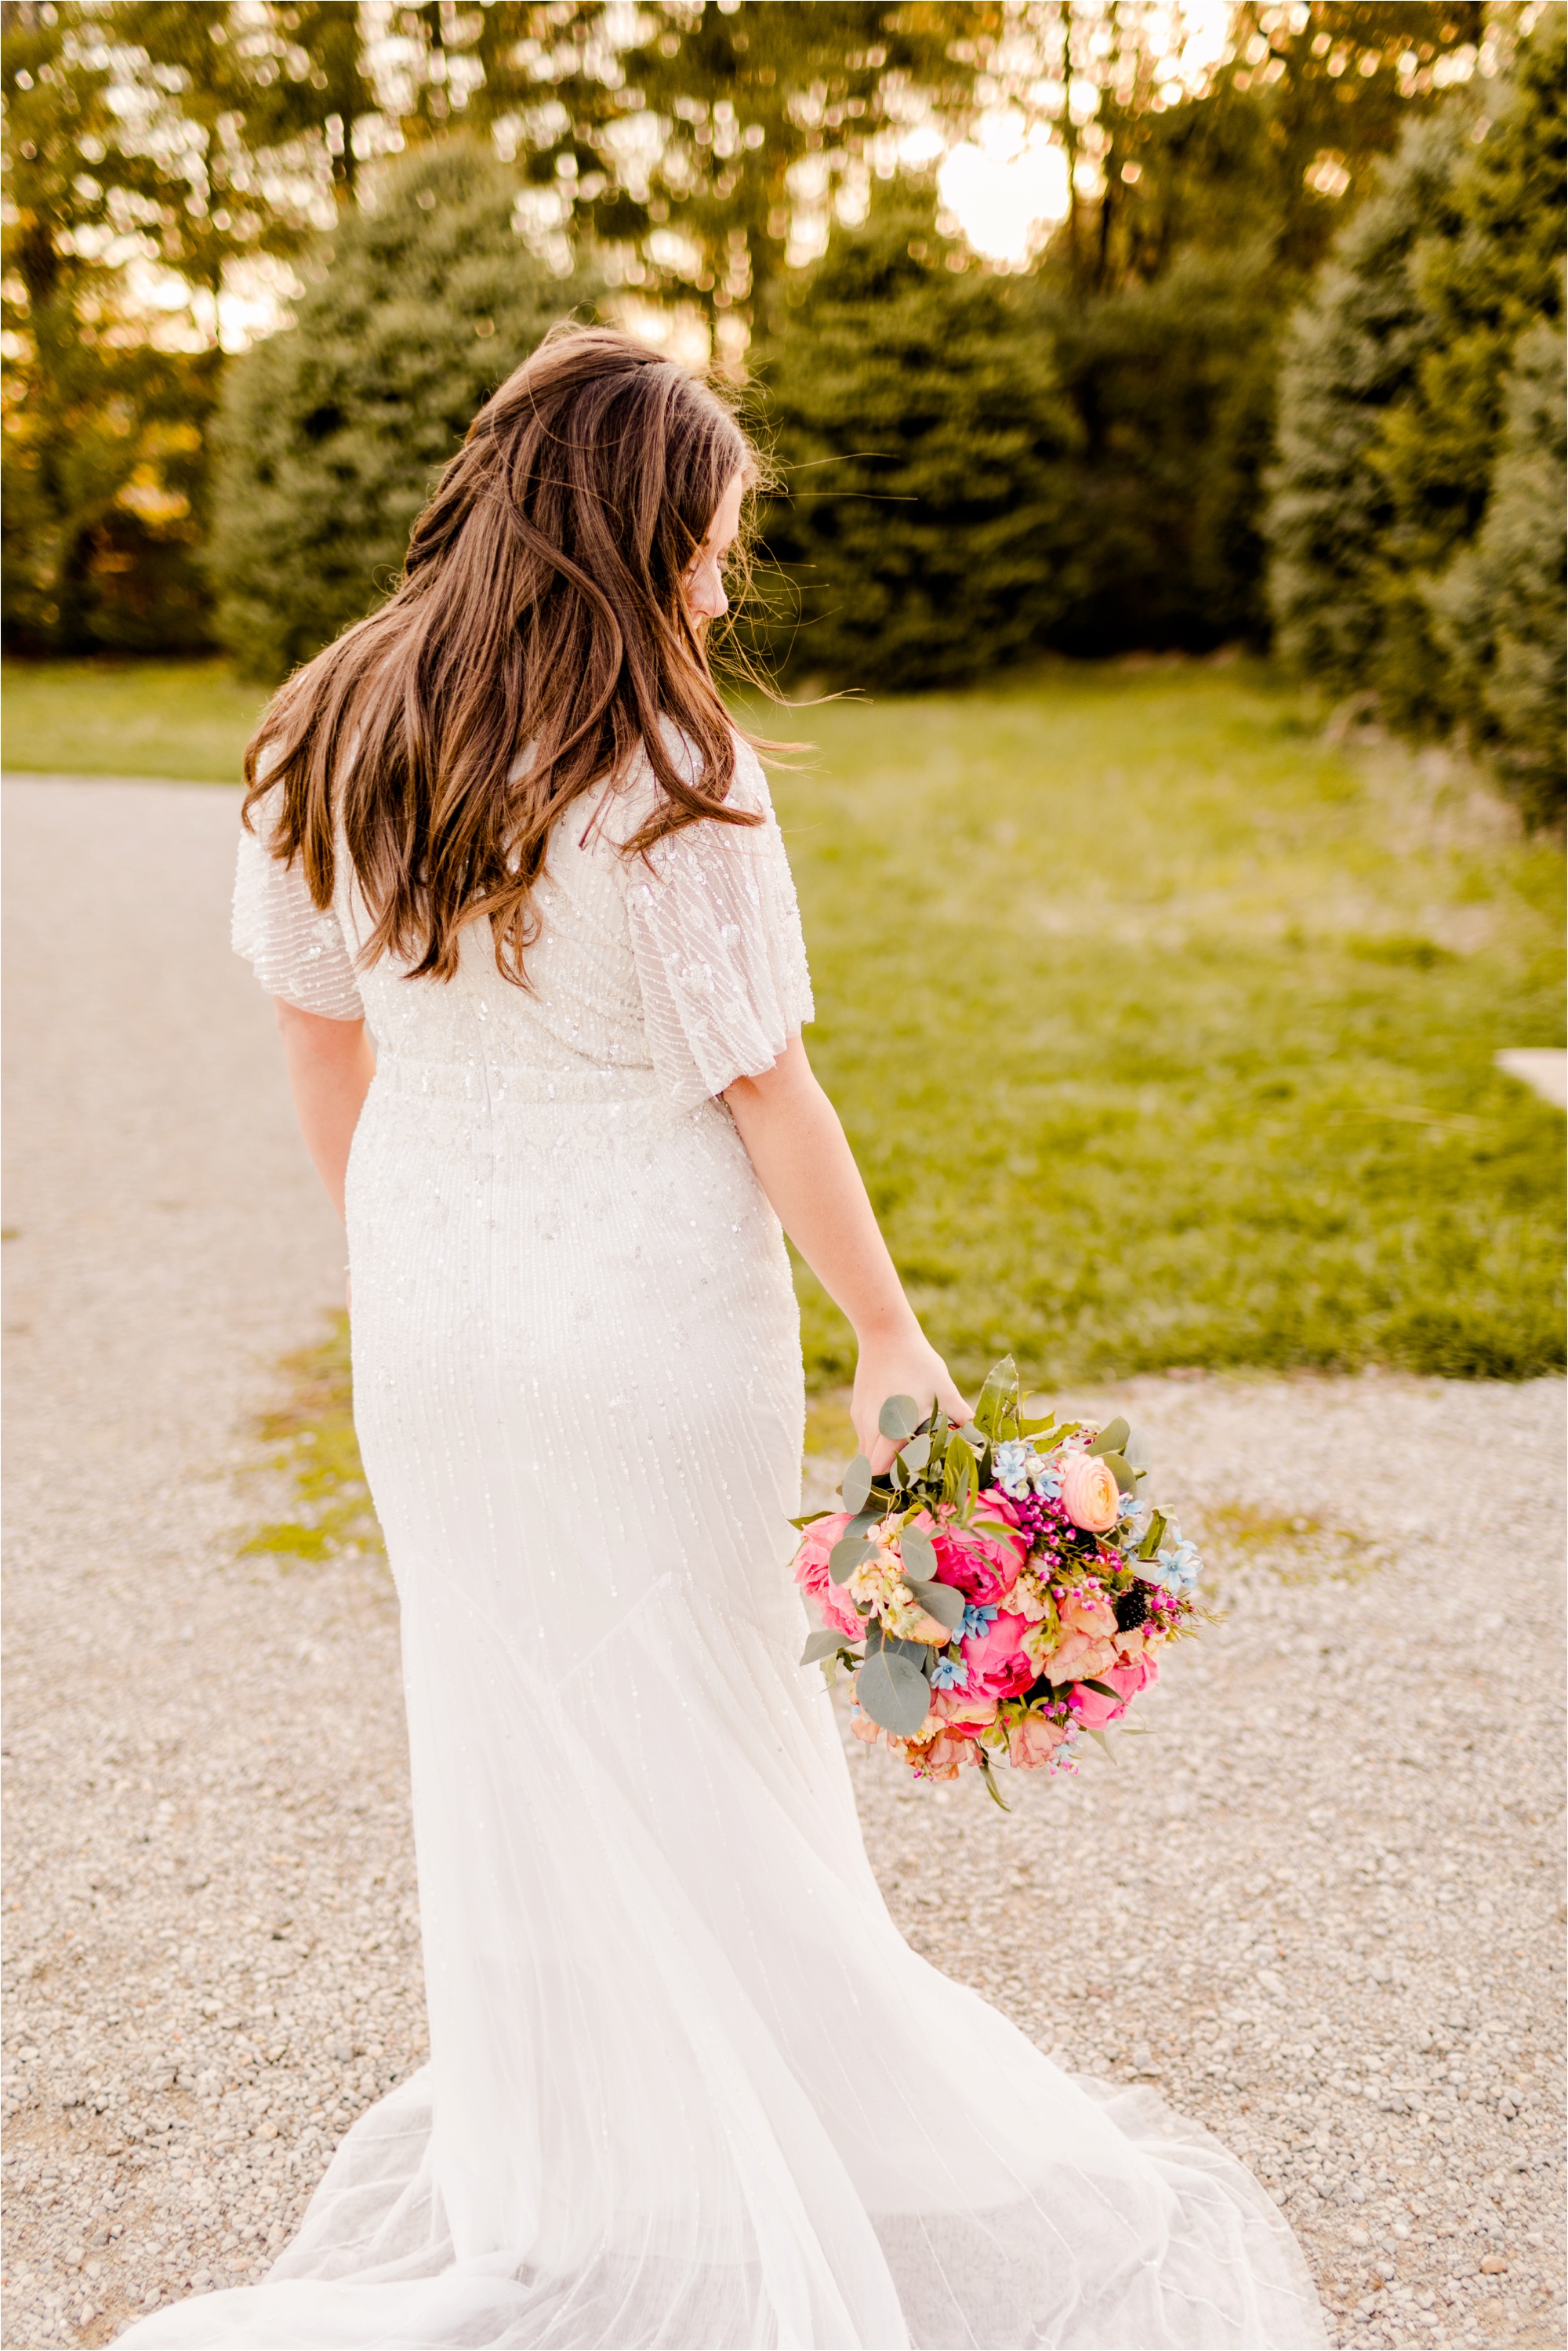 Caitlin and Luke Photography, Illinois Wedding Photographers, Champaign Wedding Photographers, Bloomington Normal Wedding Photographers, Romantic Red and Pink Sunset Styled Shoot_9603.jpg